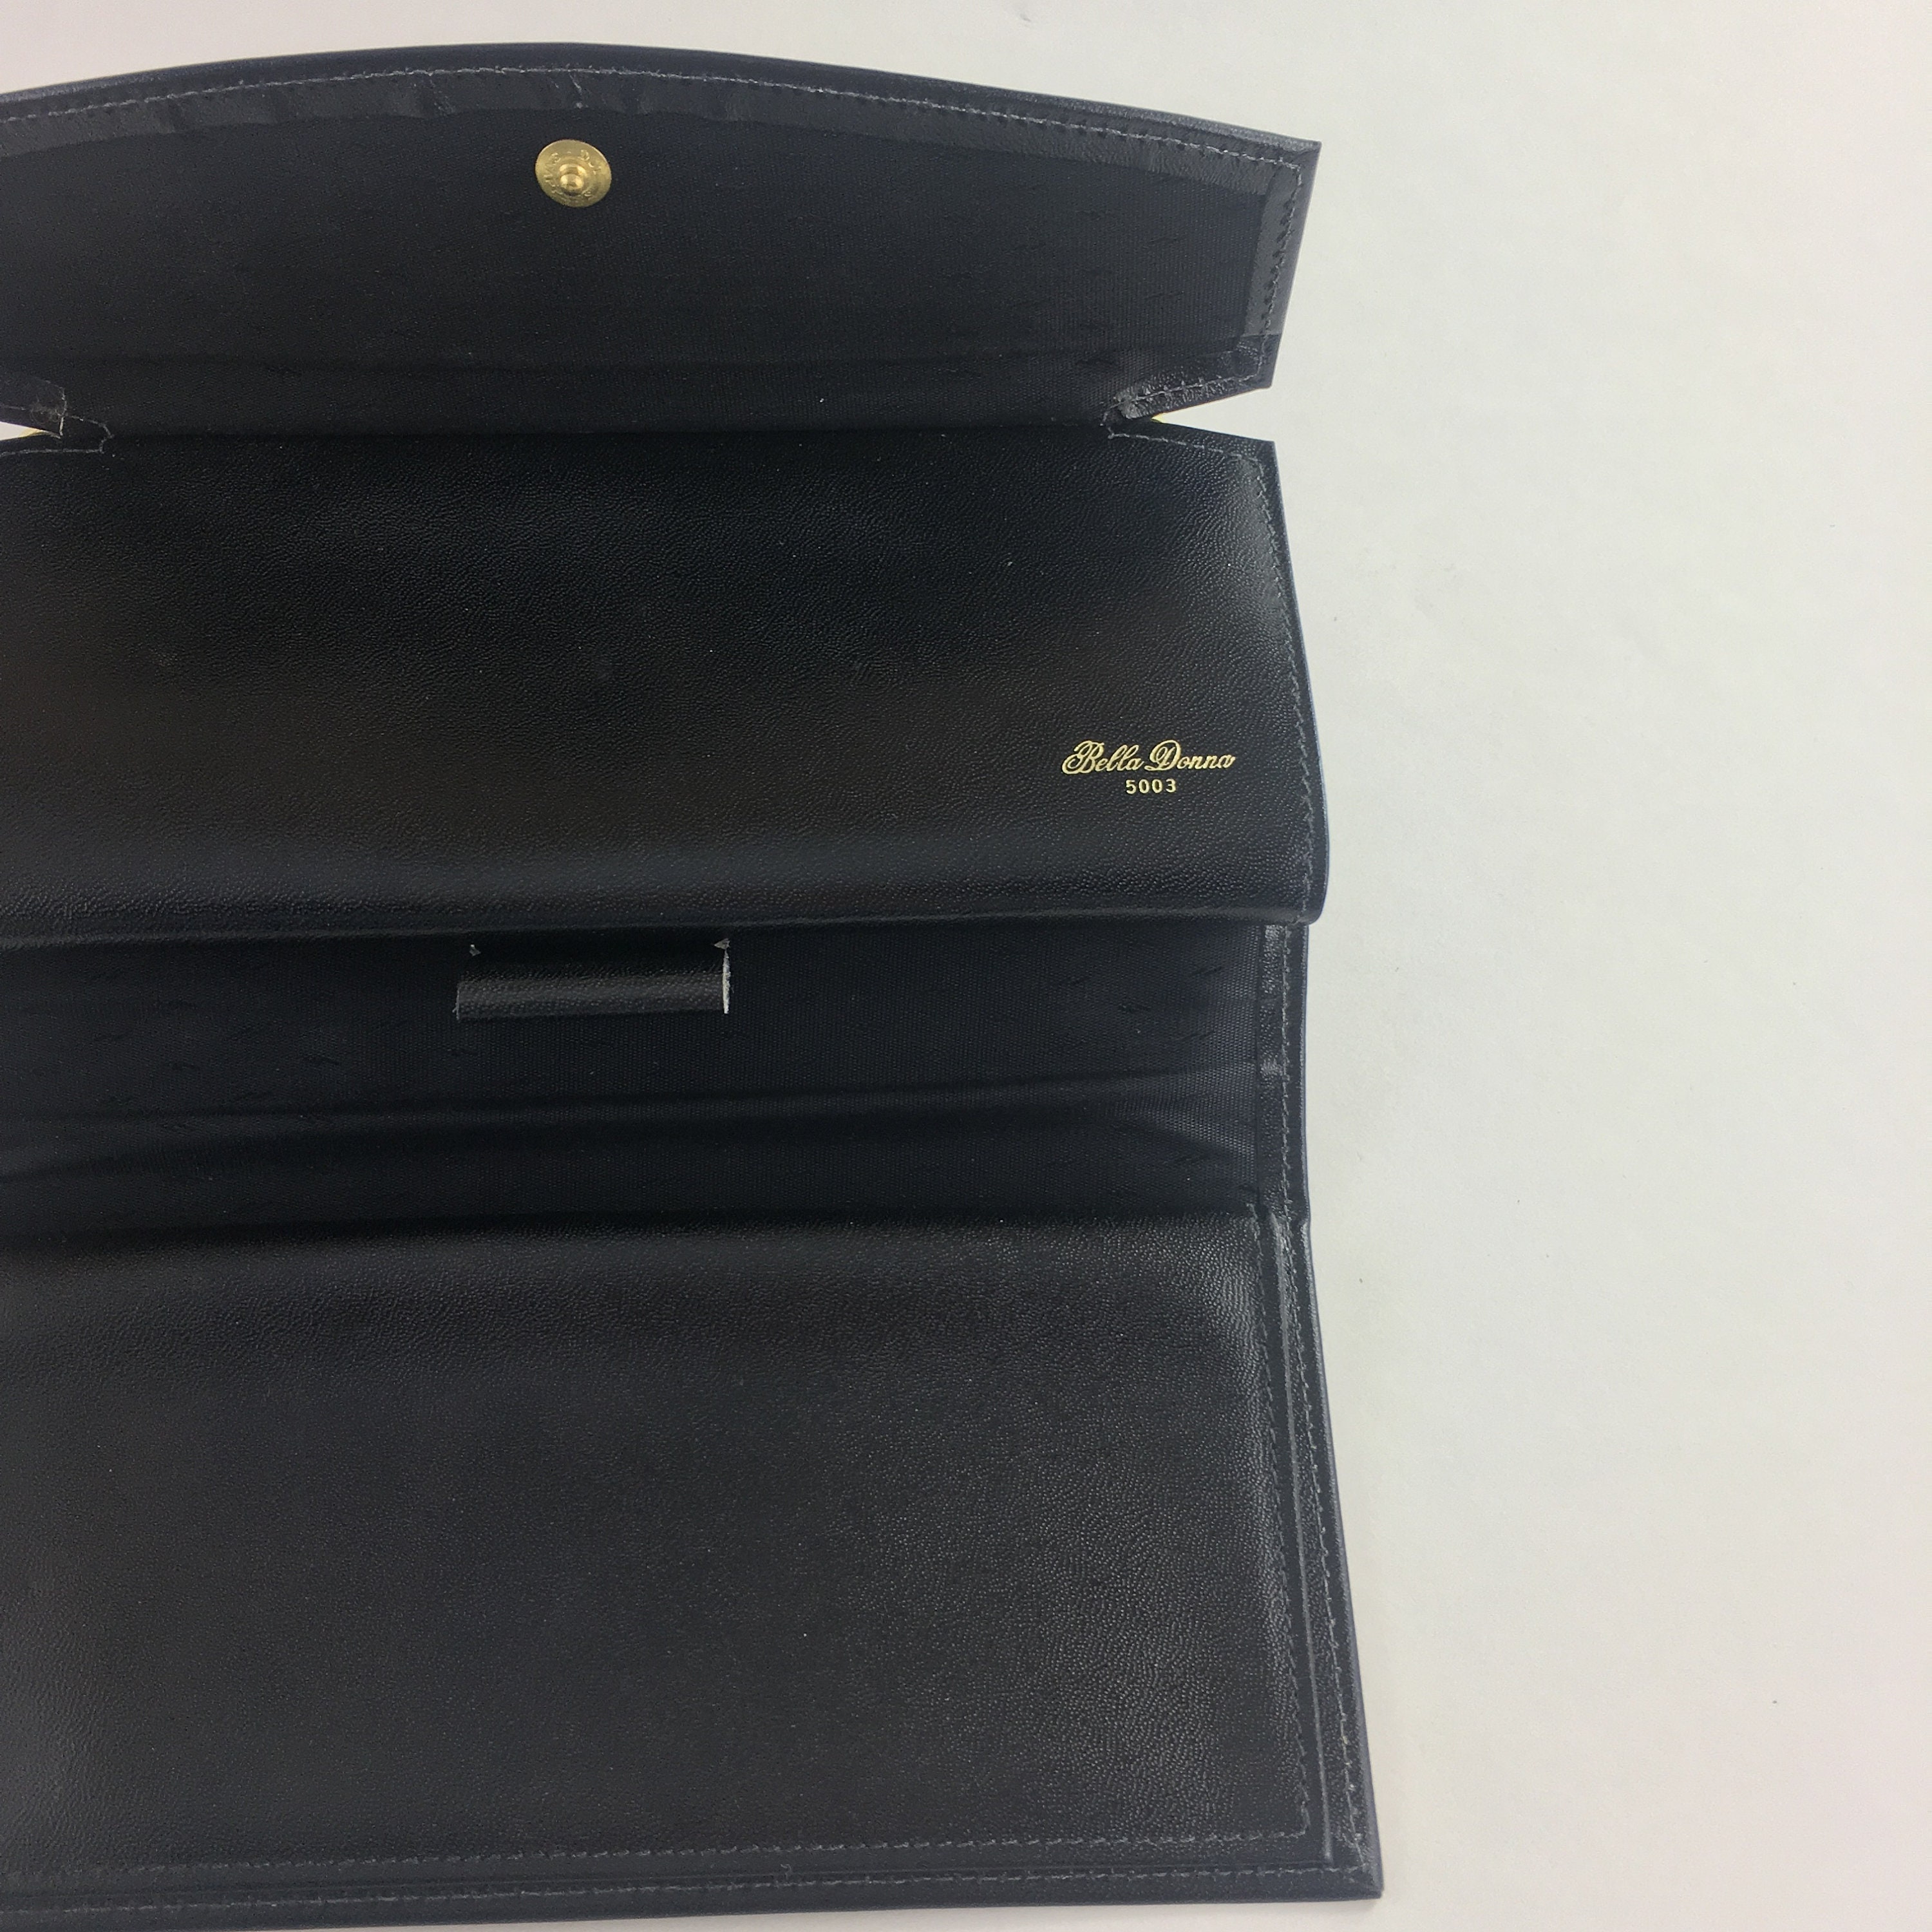 Ferree Black Leather Ladies Wallet 1950s Made in Canada - Etsy